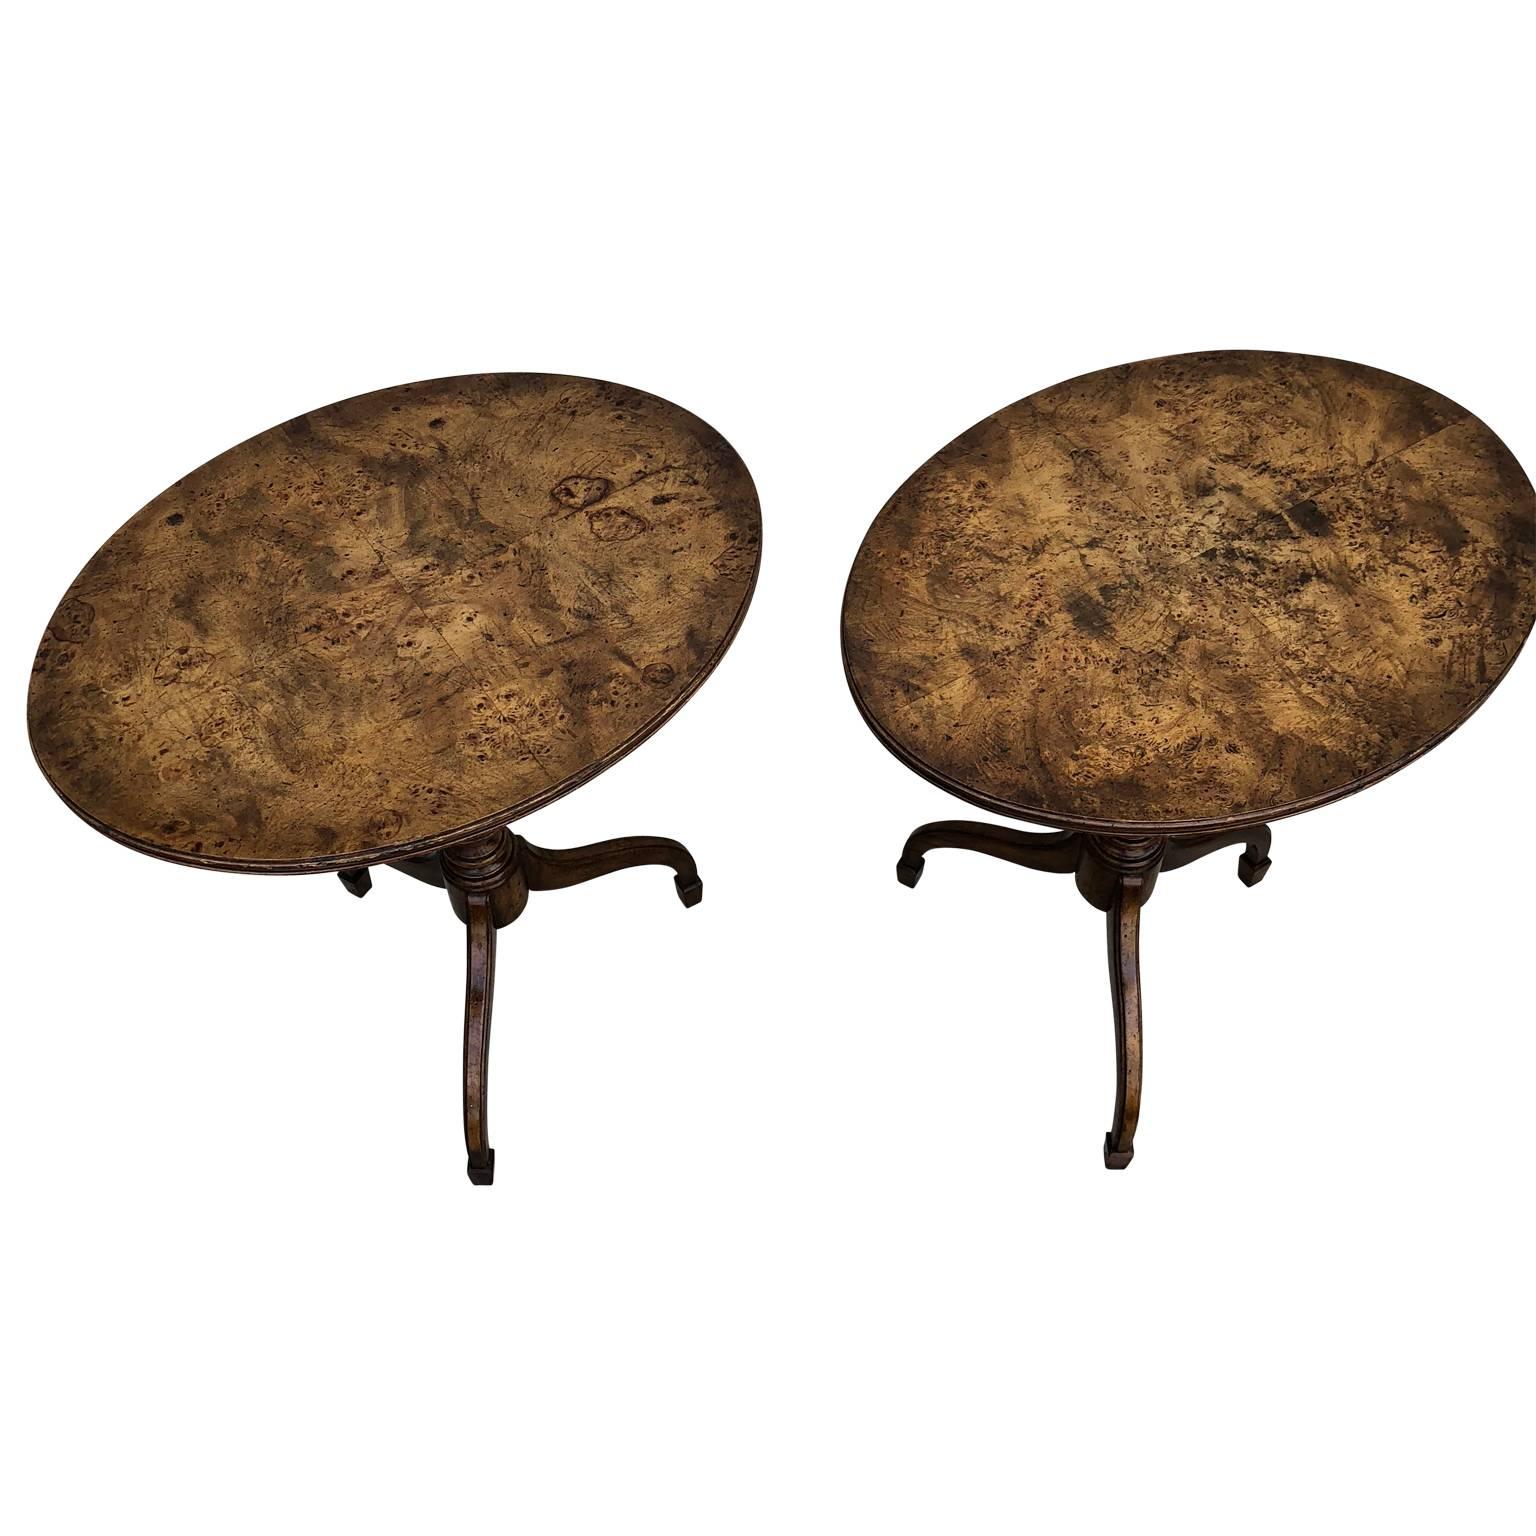 Pair of Mid-Century Modern Burl Wood Lamp or Side Tables by Weiman 1